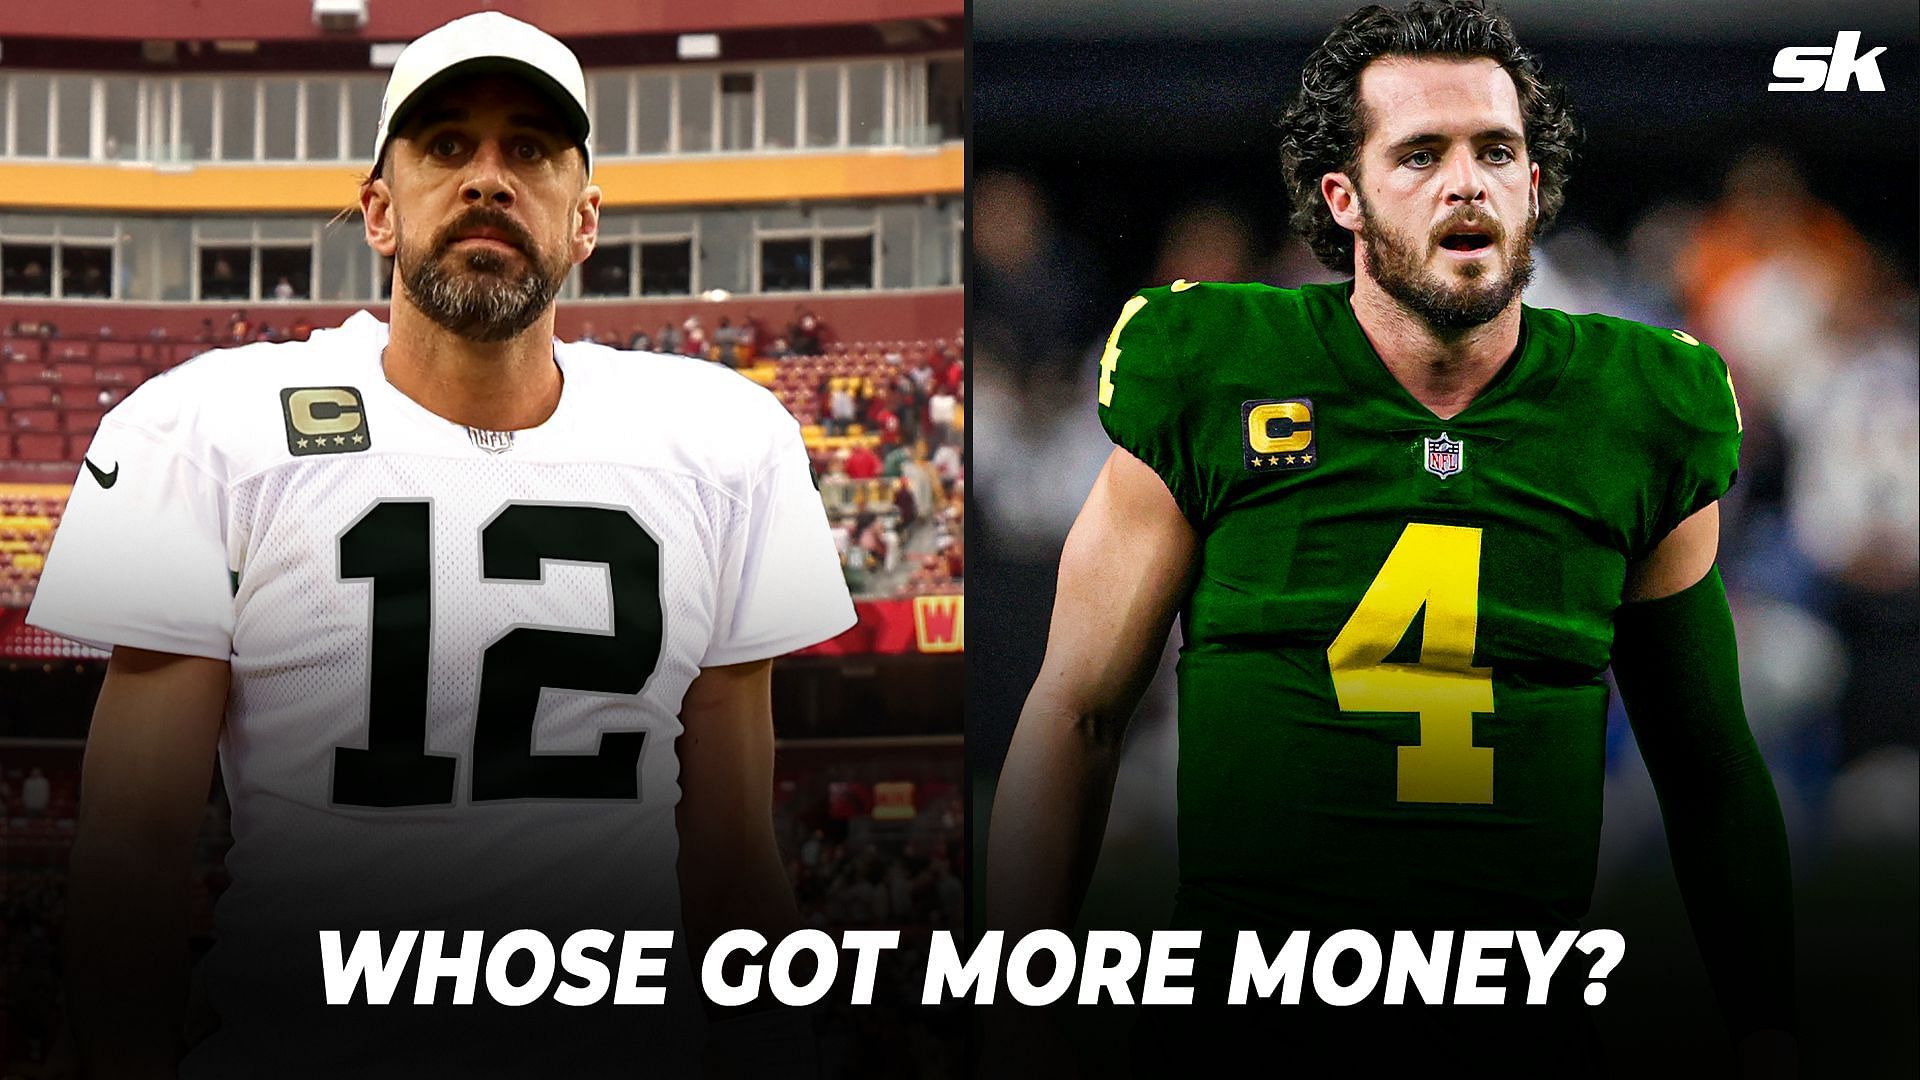 Insider Peter King floats insane trade involving Derek Carr and Aaron Rodgers